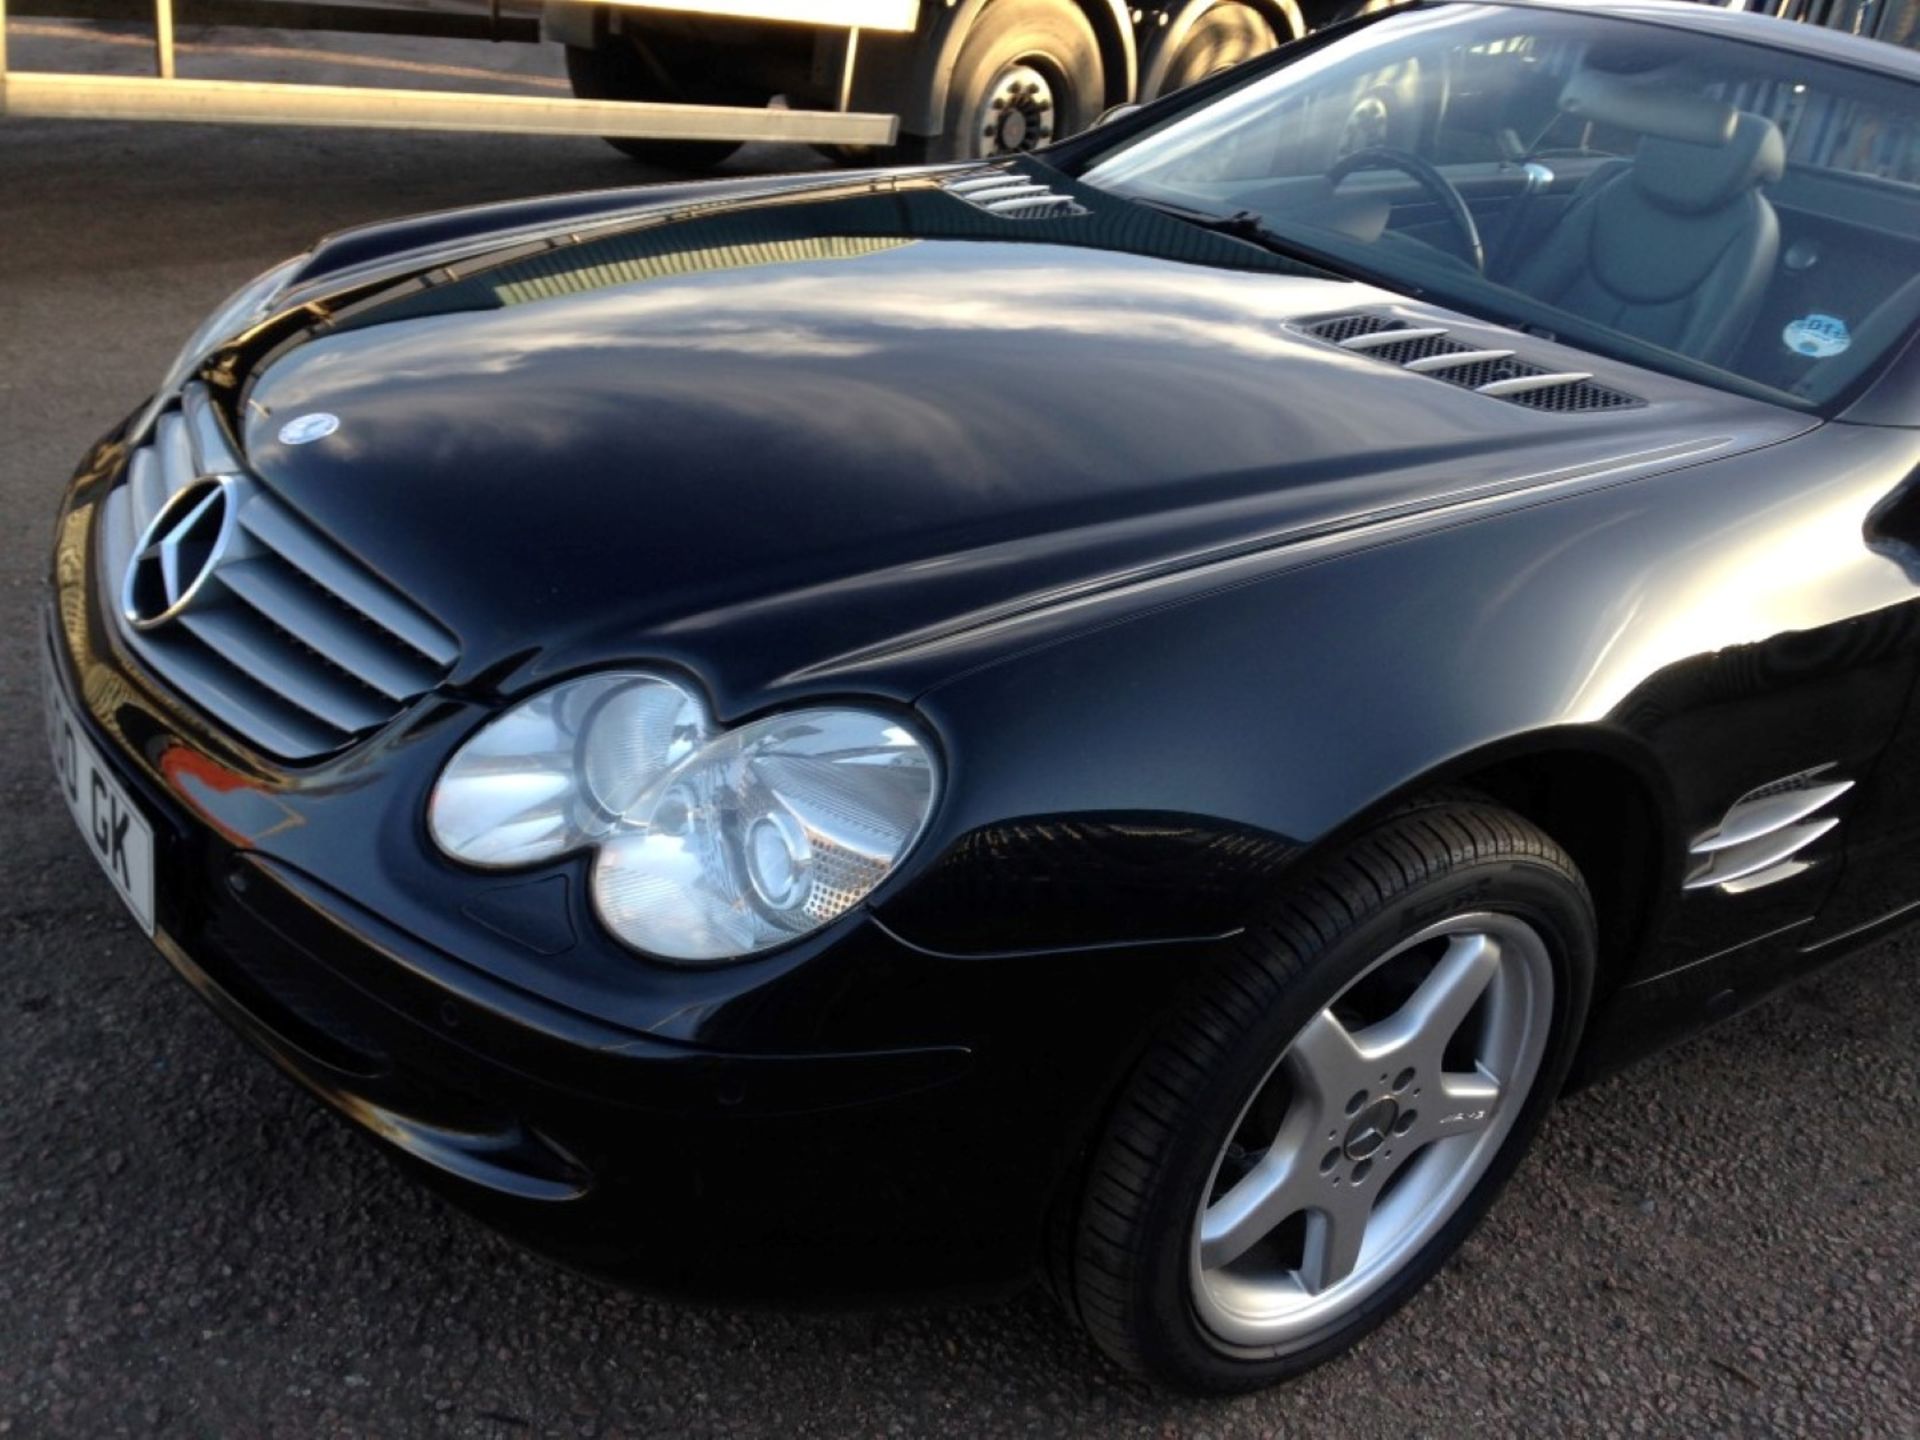 1 x Mercedes SL500 Automatic 5.0 Convertible - Petrol - Year 2002 - 94,500 Miles - Long MOT Expiry - Image 23 of 40